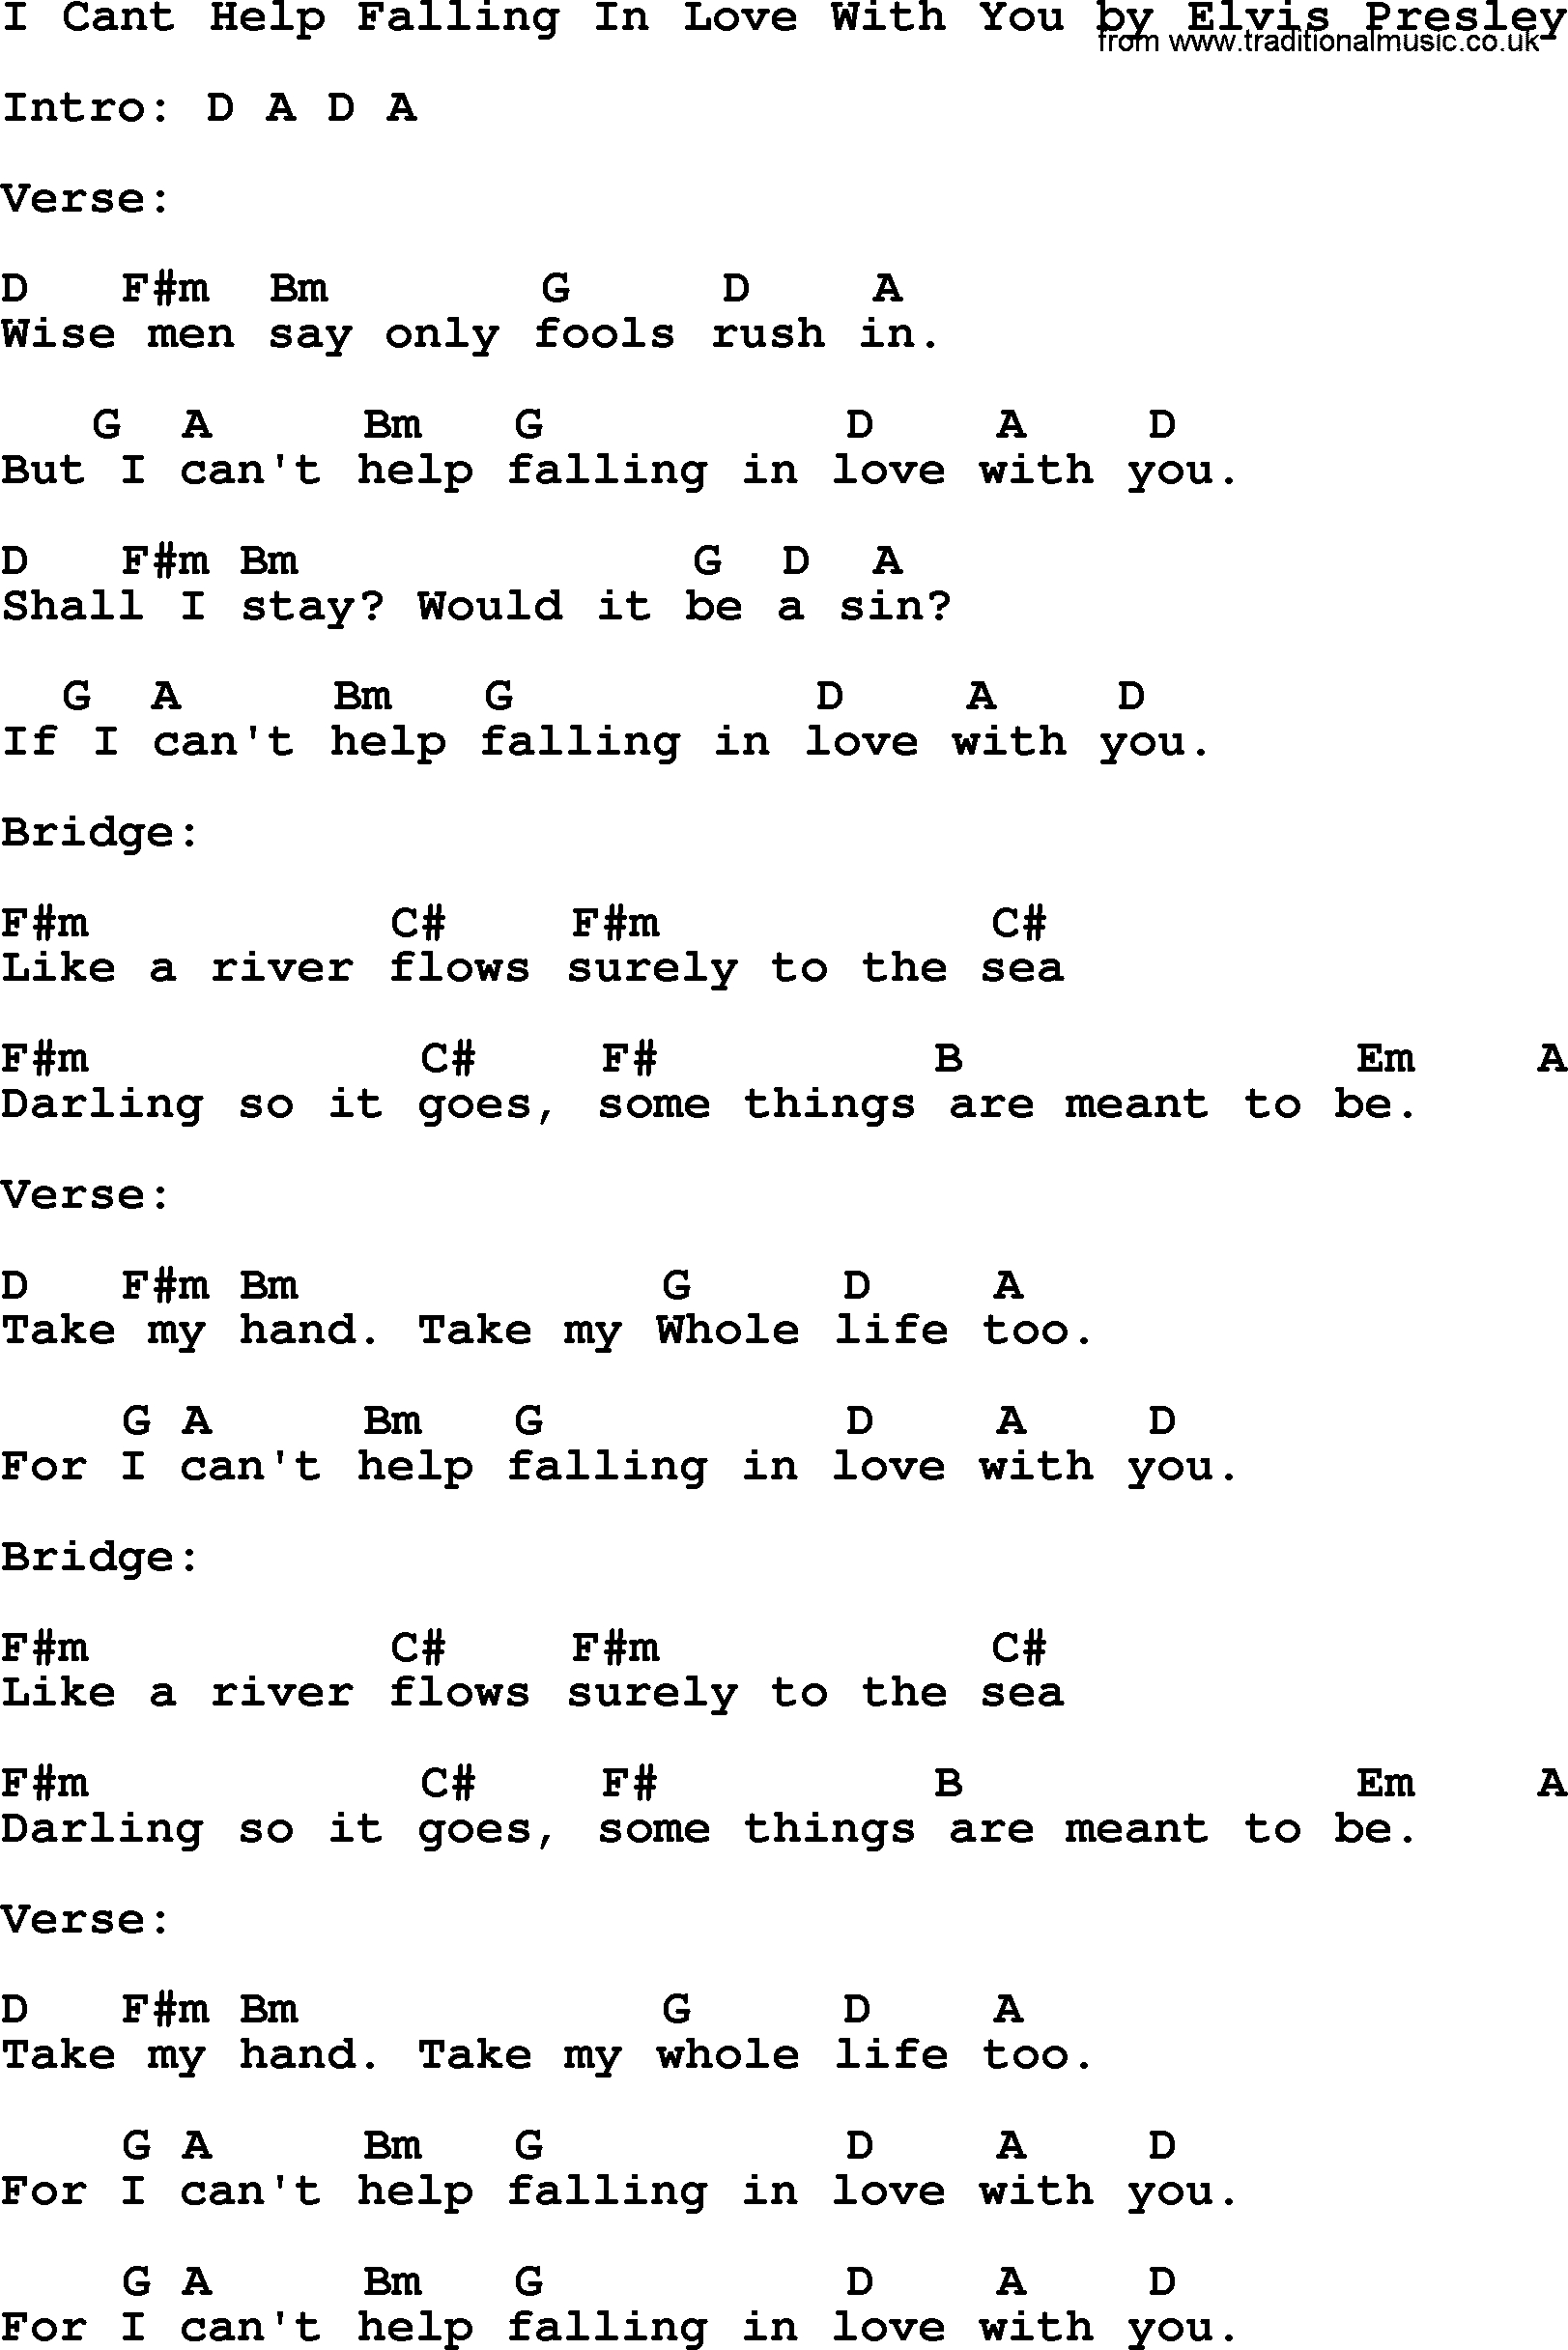 I Can T Help Falling In Love With You Chords I Cant Help Falling In Love With You Elvis Presley Lyrics And